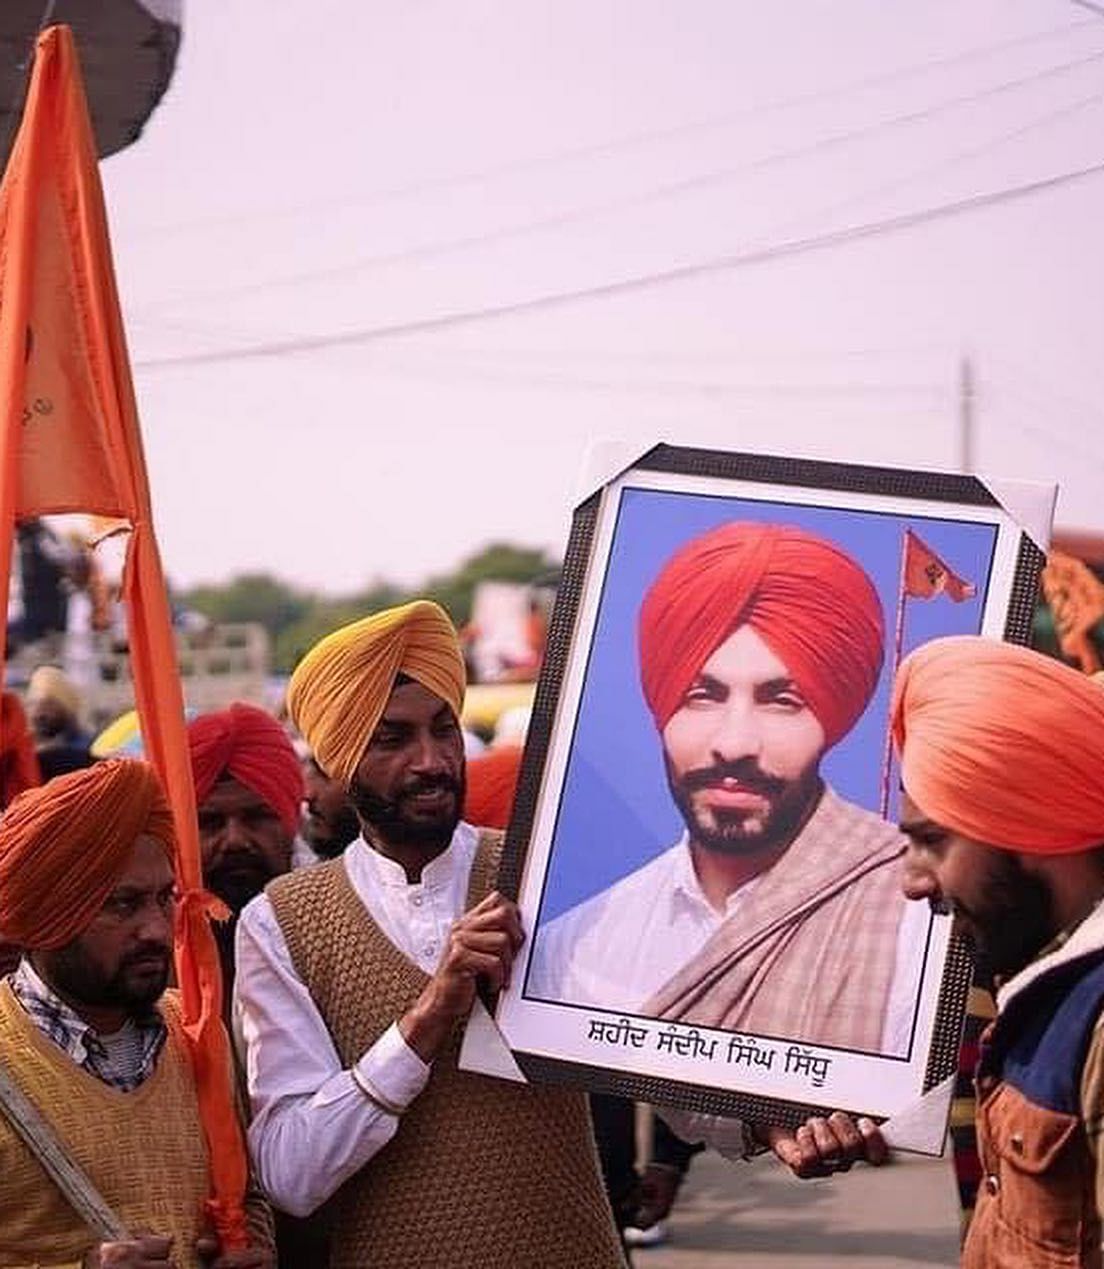 While Amritpal Singh's critics accuse him of trying to destabilise Punjab, his fans say he's trying to revive Sikhi.